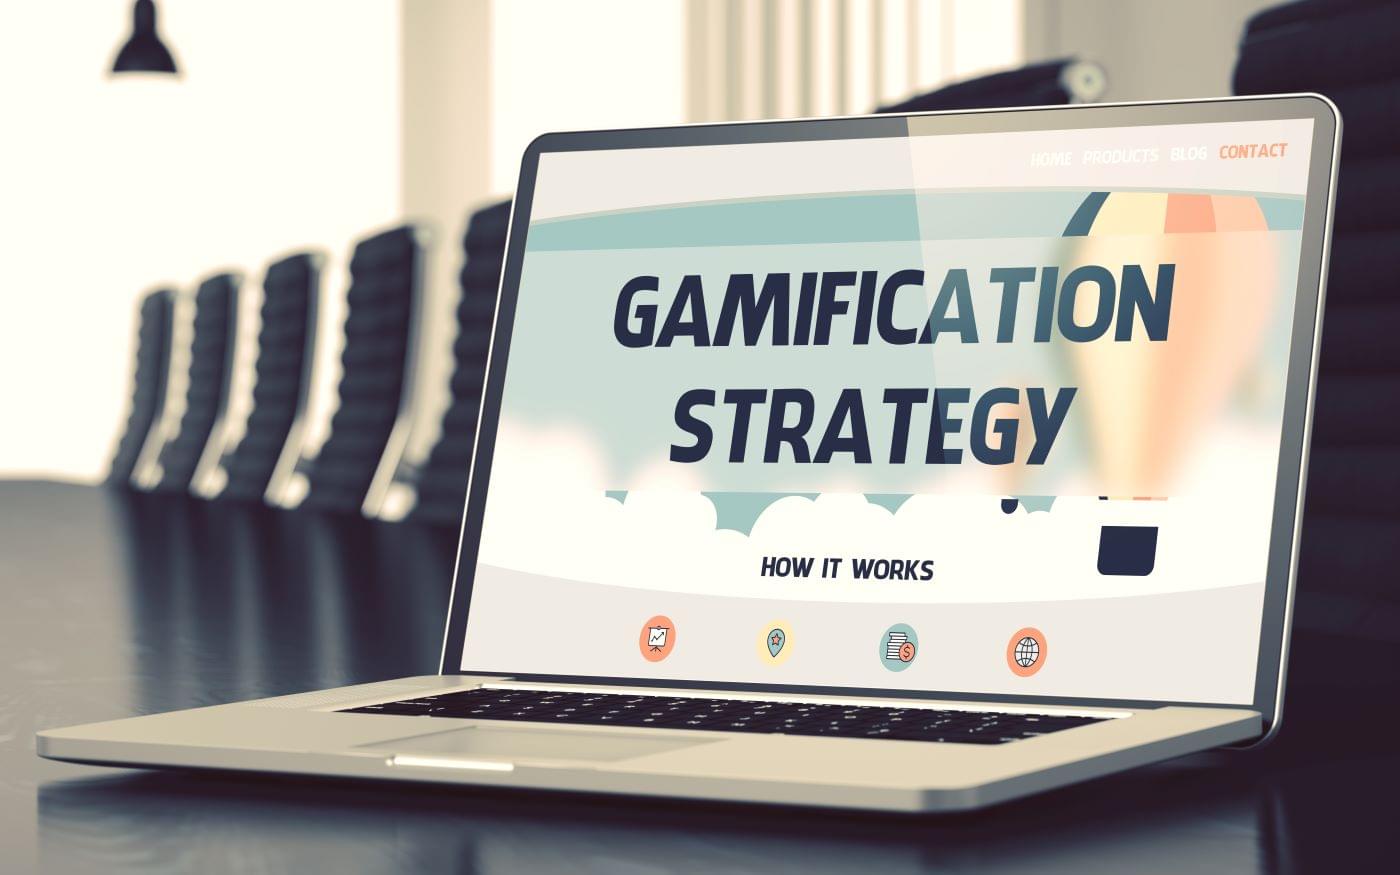 Picture of a laptop with the words "gamification strategy" on the screen